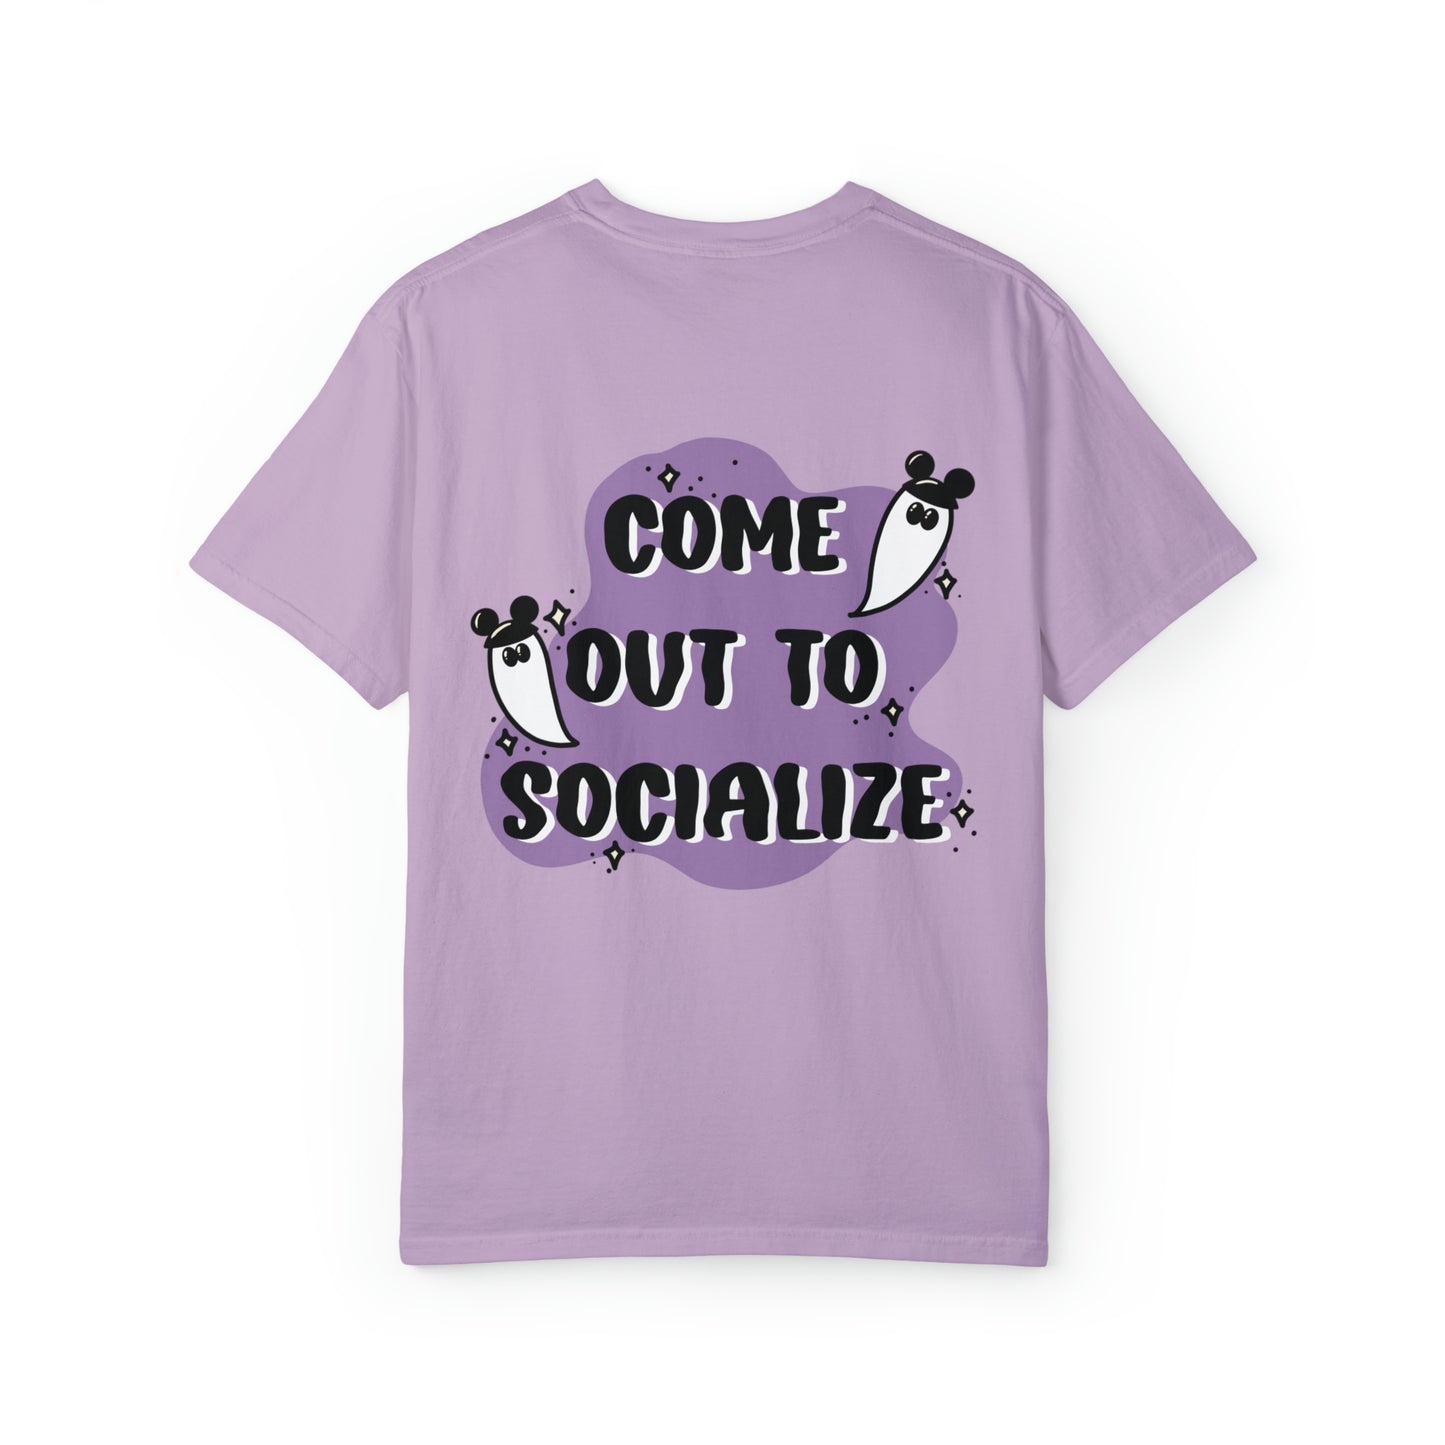 Adult Come out to socialize Tee - Comfort Colors